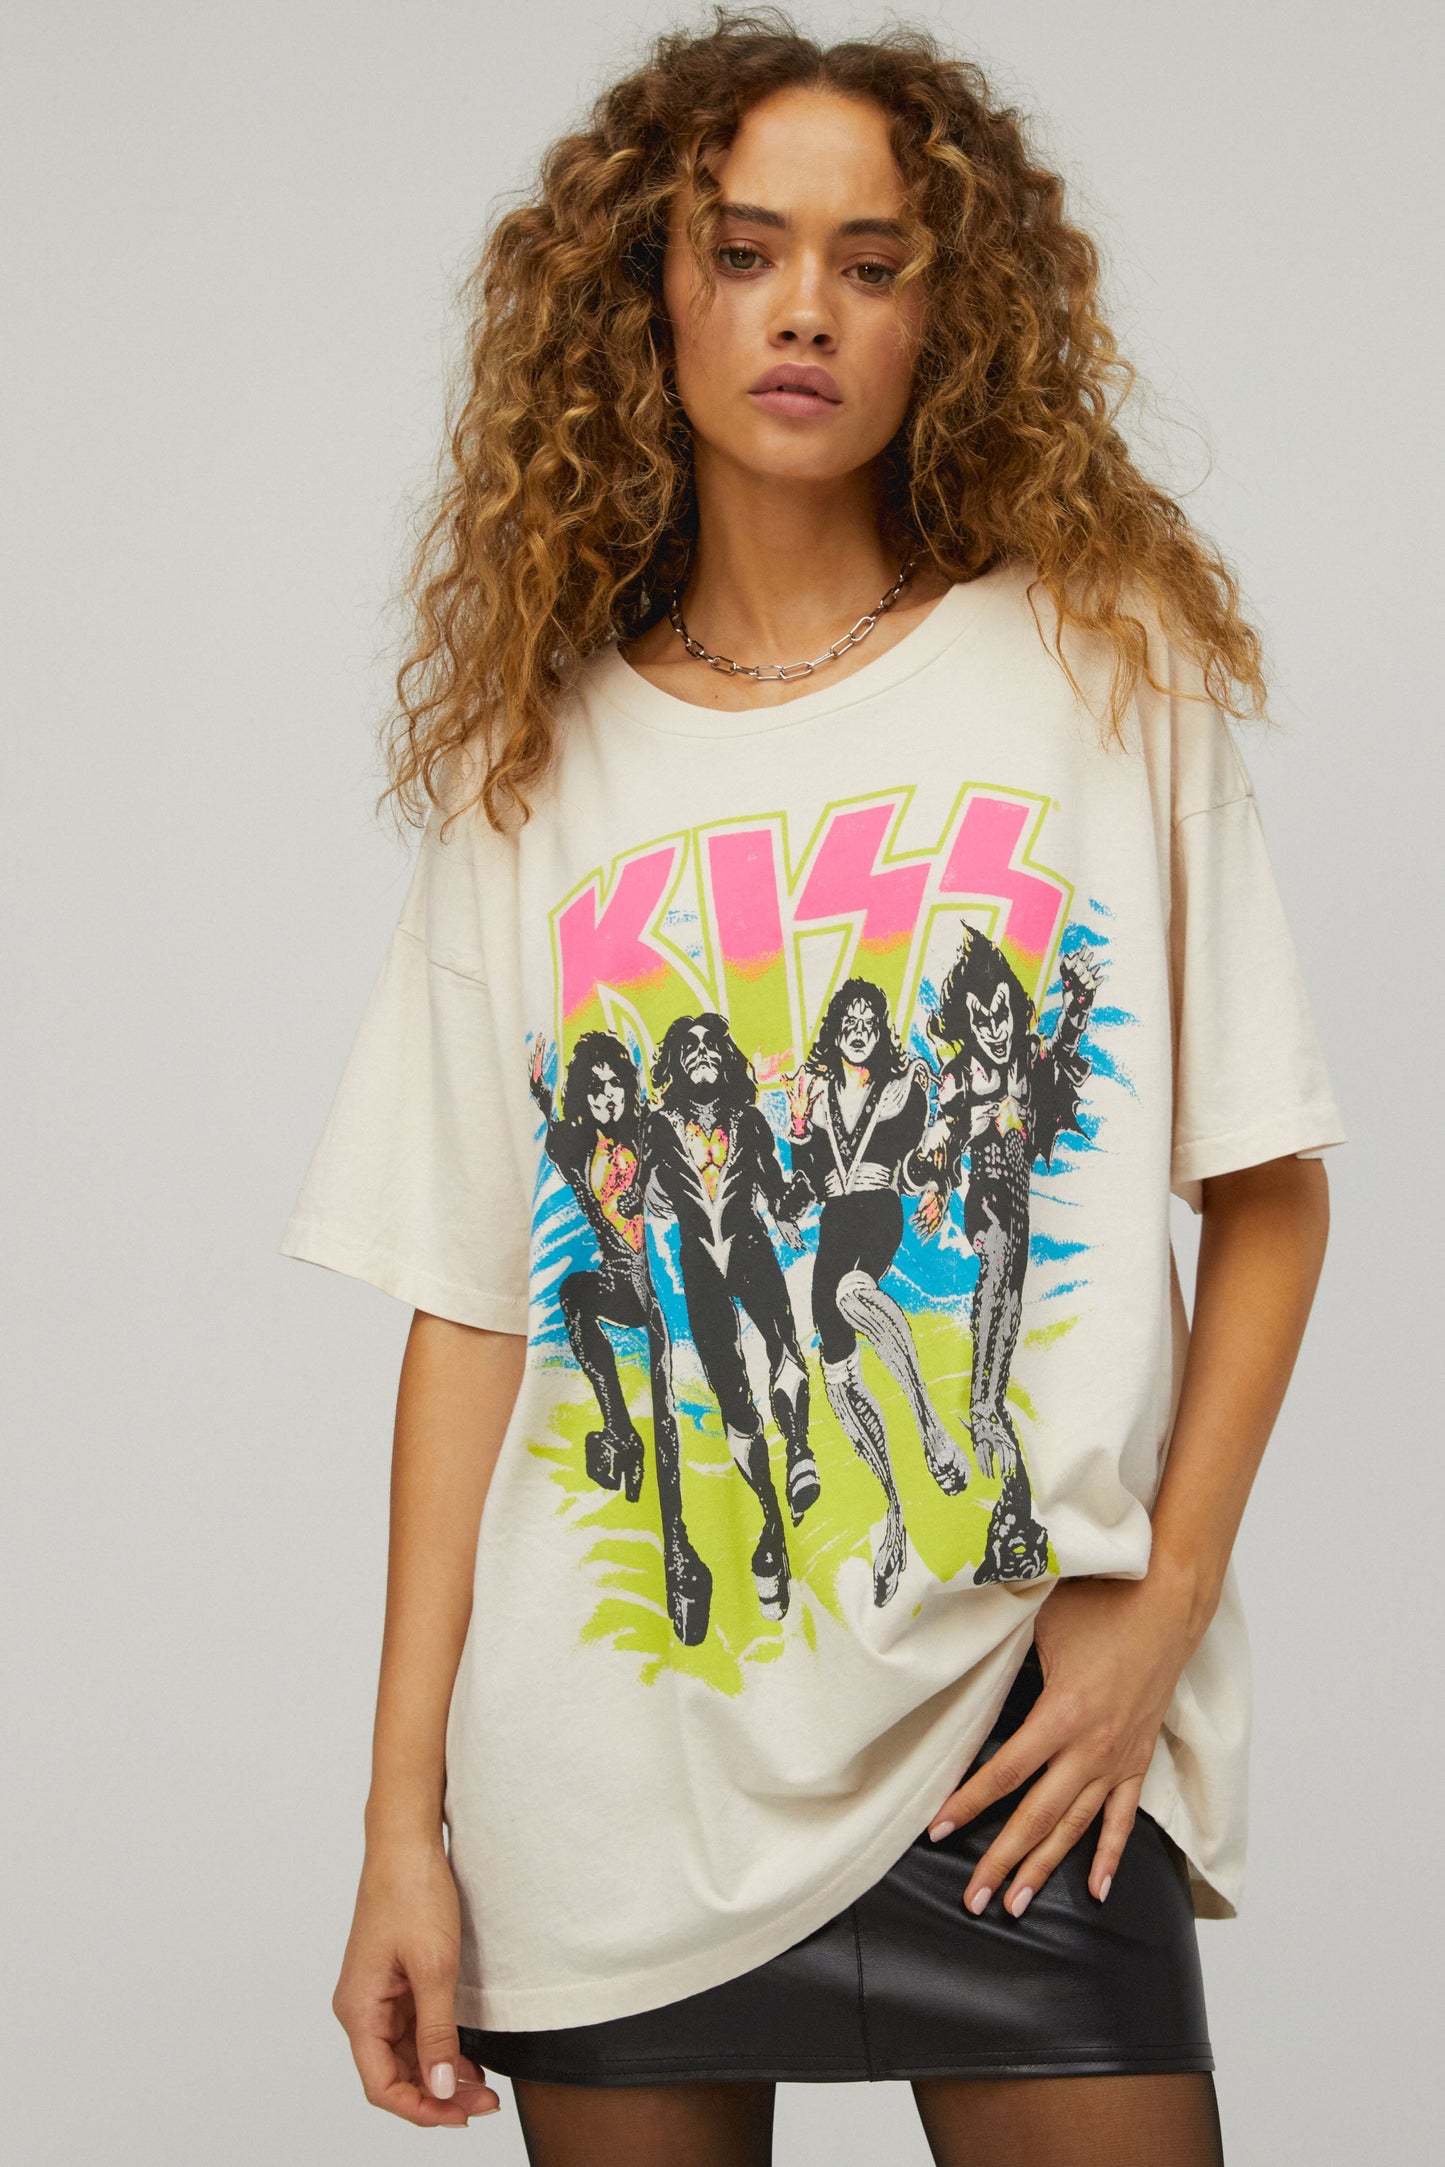 KISS "Destroyer" Licensed Graphic Tee